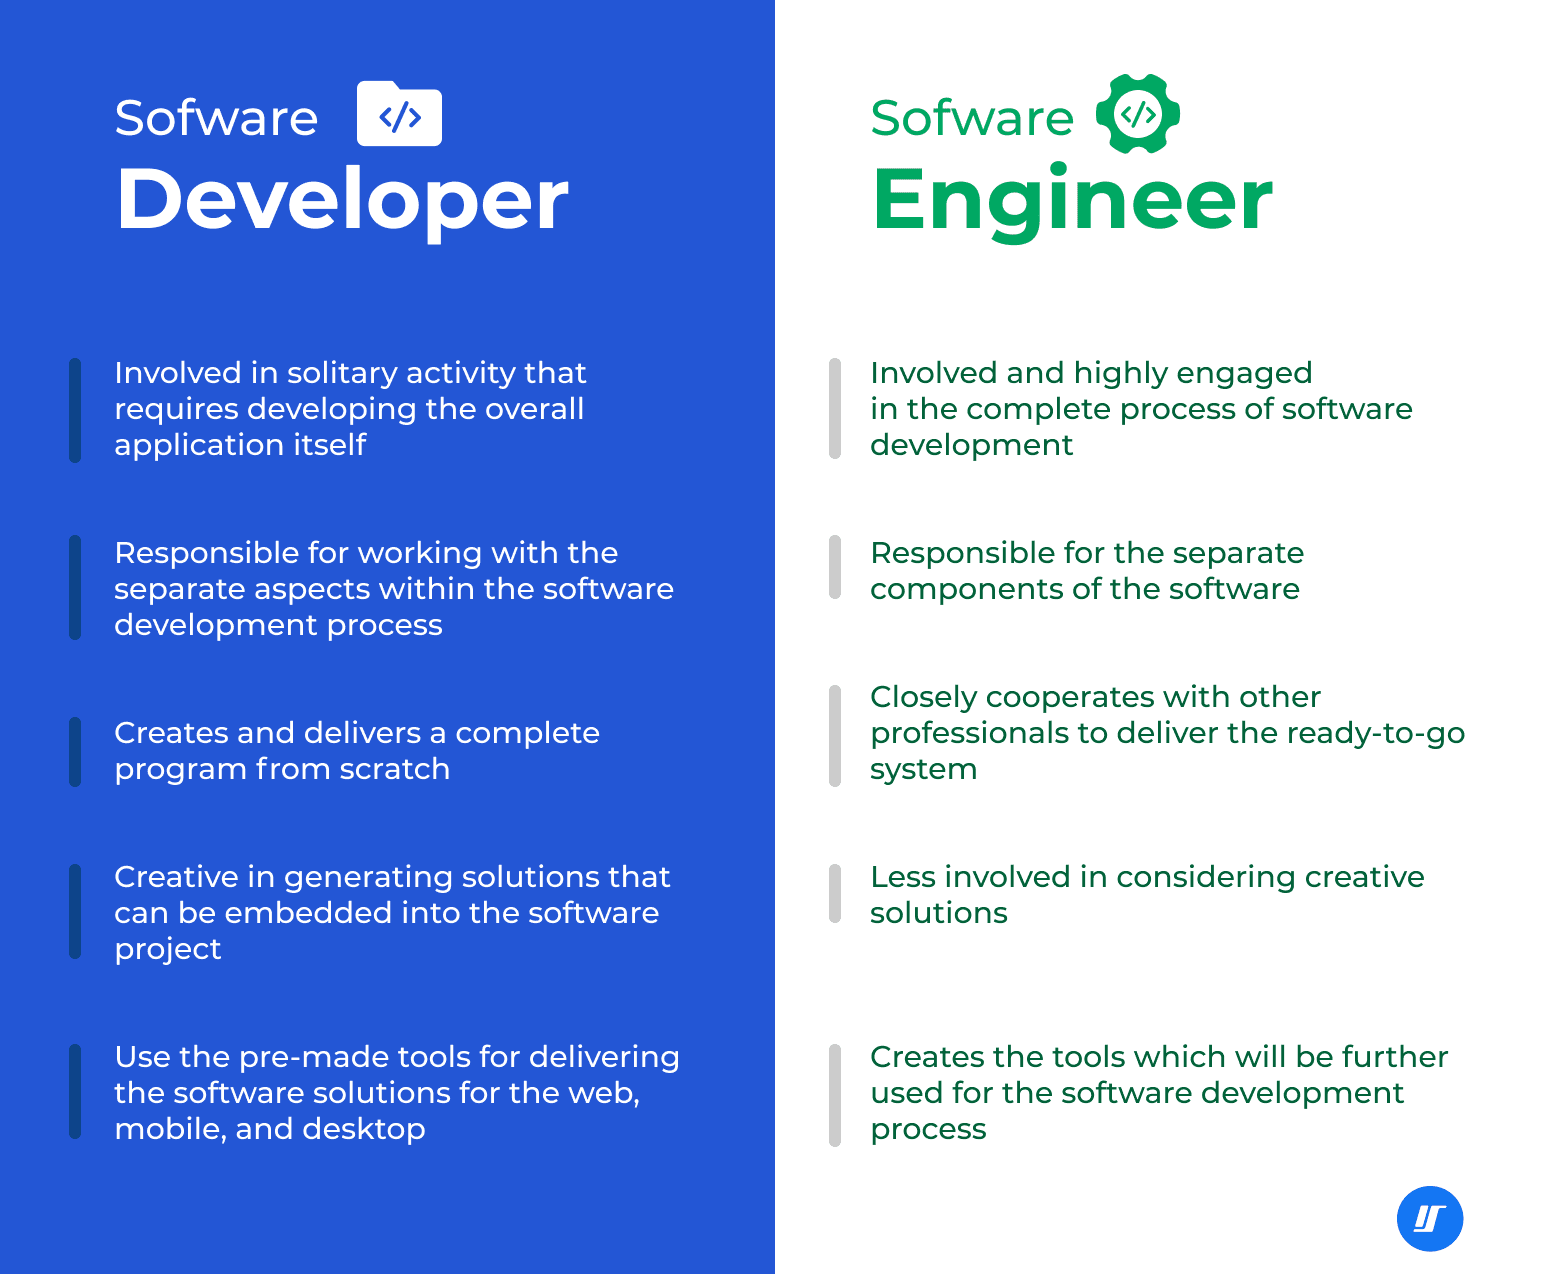 Infographic on the main aspects of the work of a software developer and software engineer